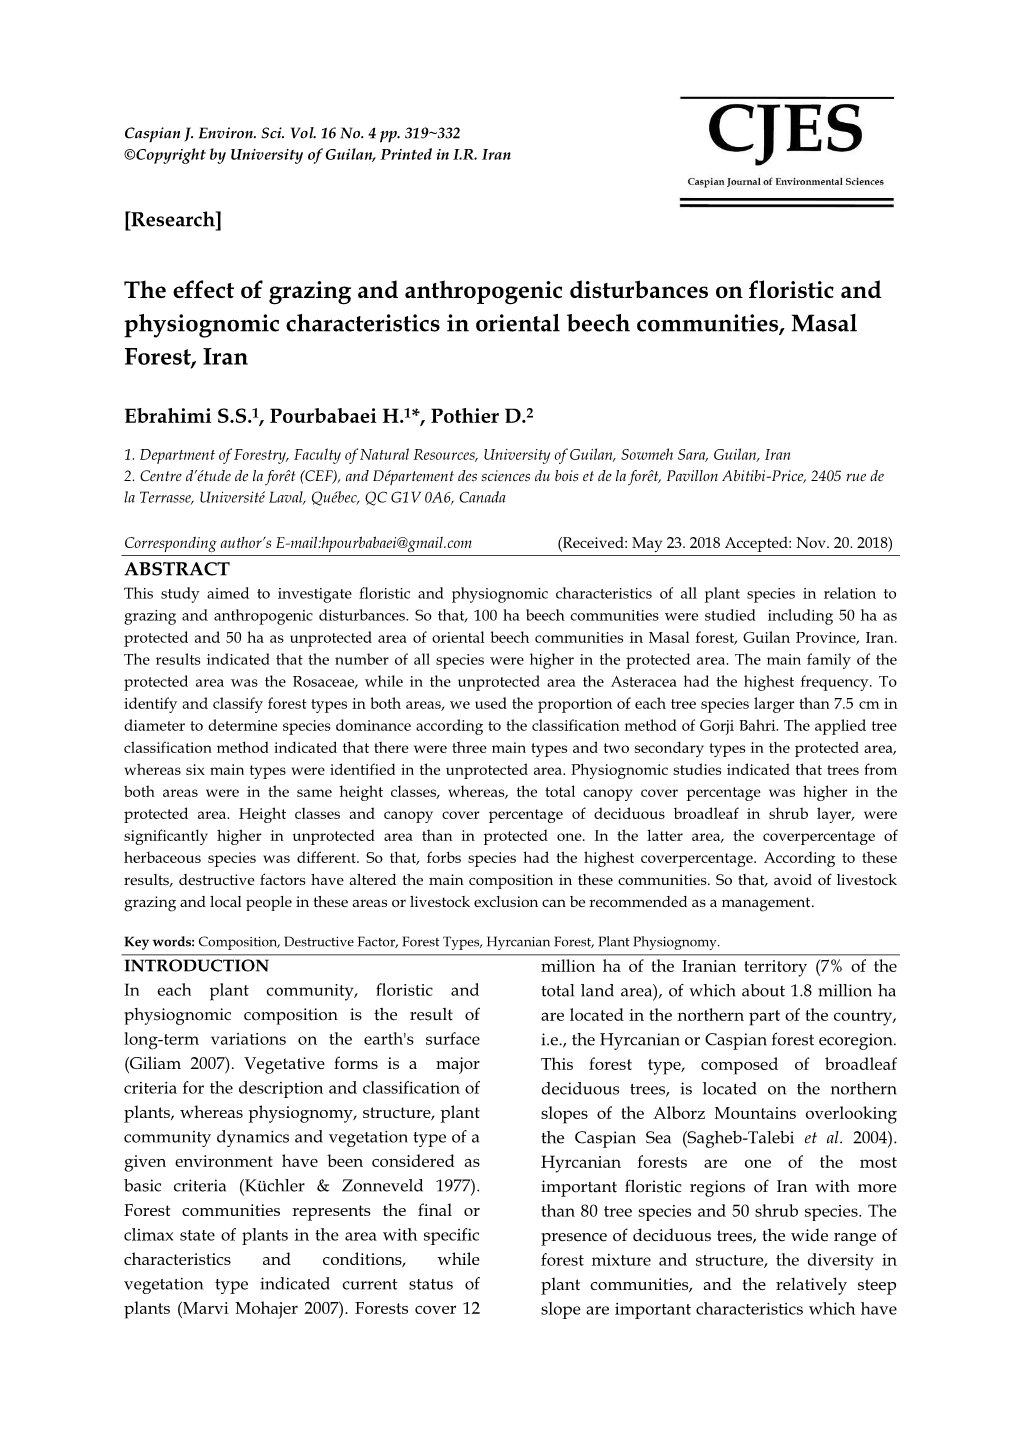 The Effect of Grazing and Anthropogenic Disturbances on Floristic and Physiognomic Characteristics in Oriental Beech Communities, Masal Forest, Iran